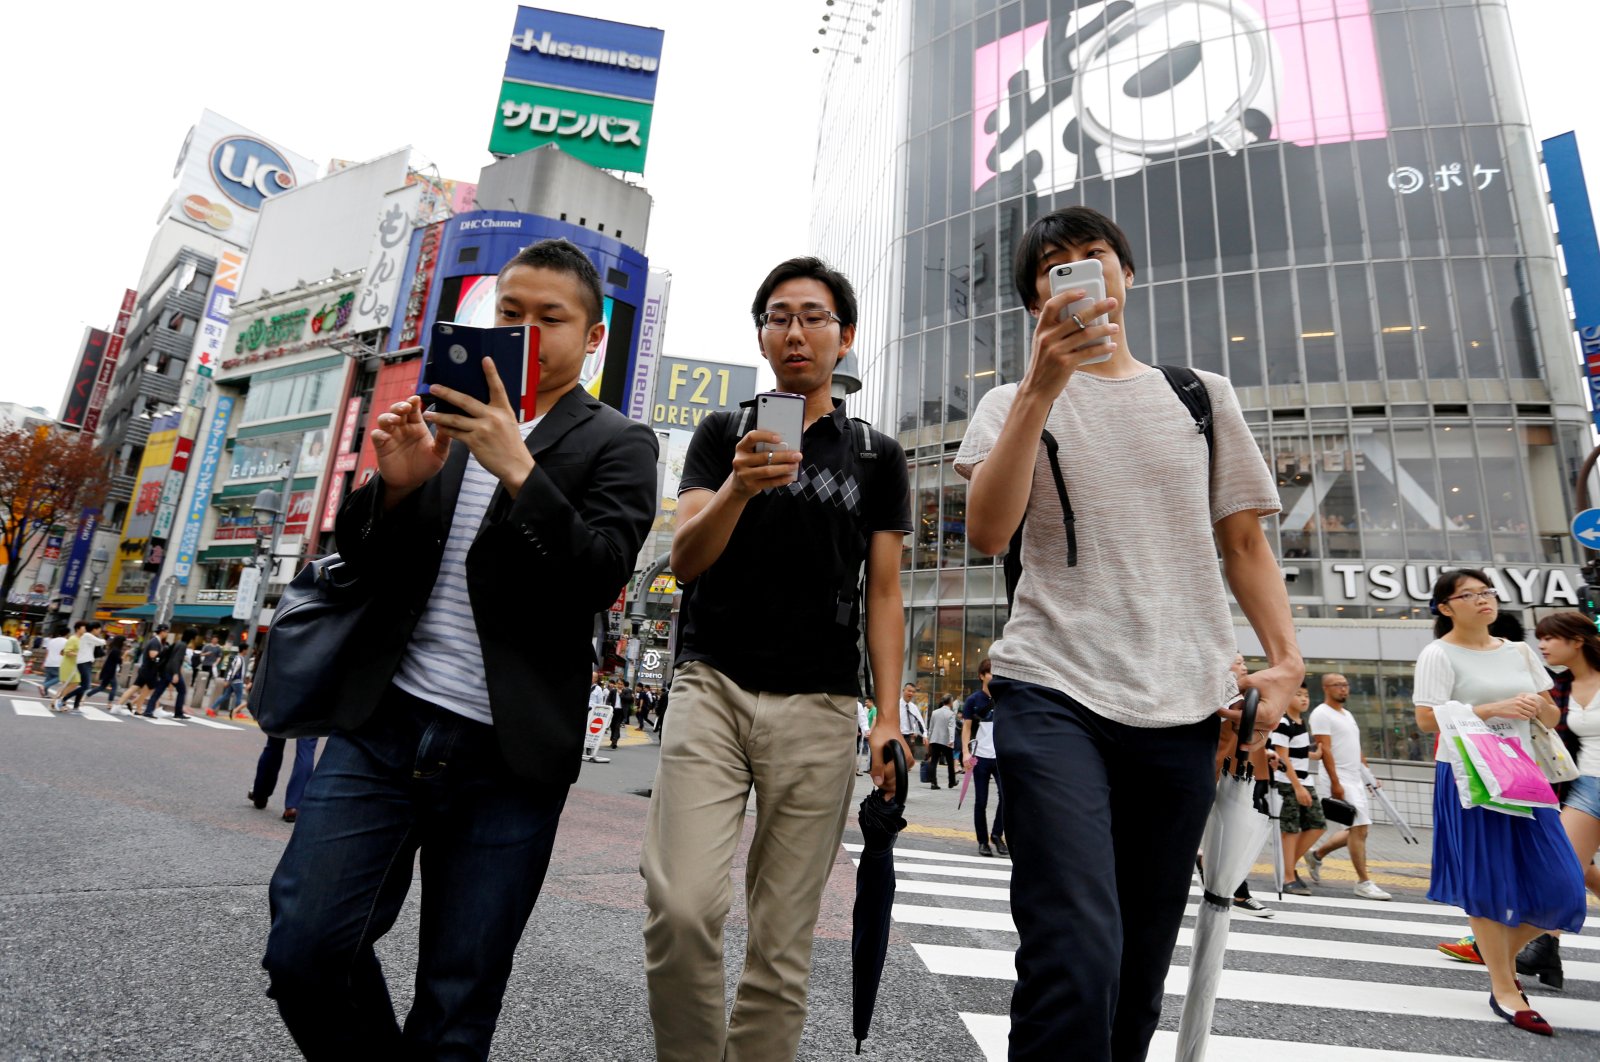 Men play the augmented reality mobile game "Pokemon Go" by Nintendo on their mobile phone as they walk at a busy crossing in Shibuya district in Tokyo, Japan, July 22, 2016. (Reuters File Photo)